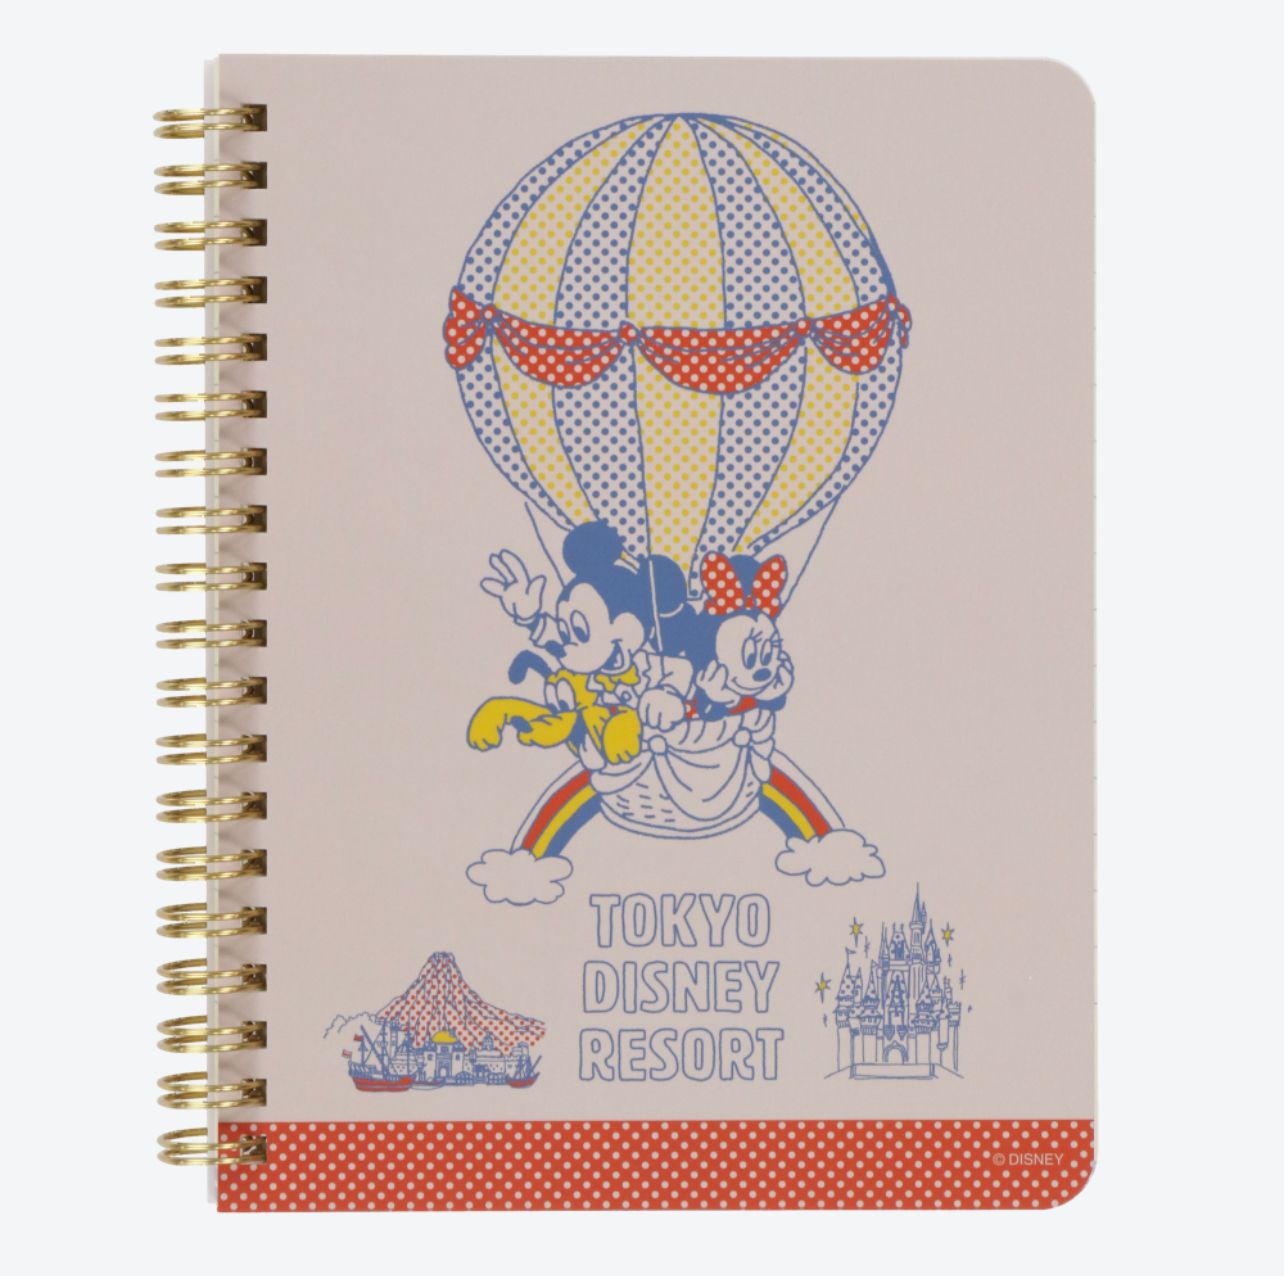 TDR - Mickey & Minnie Mouse Retro and cute! Balloon-themed x Notebook